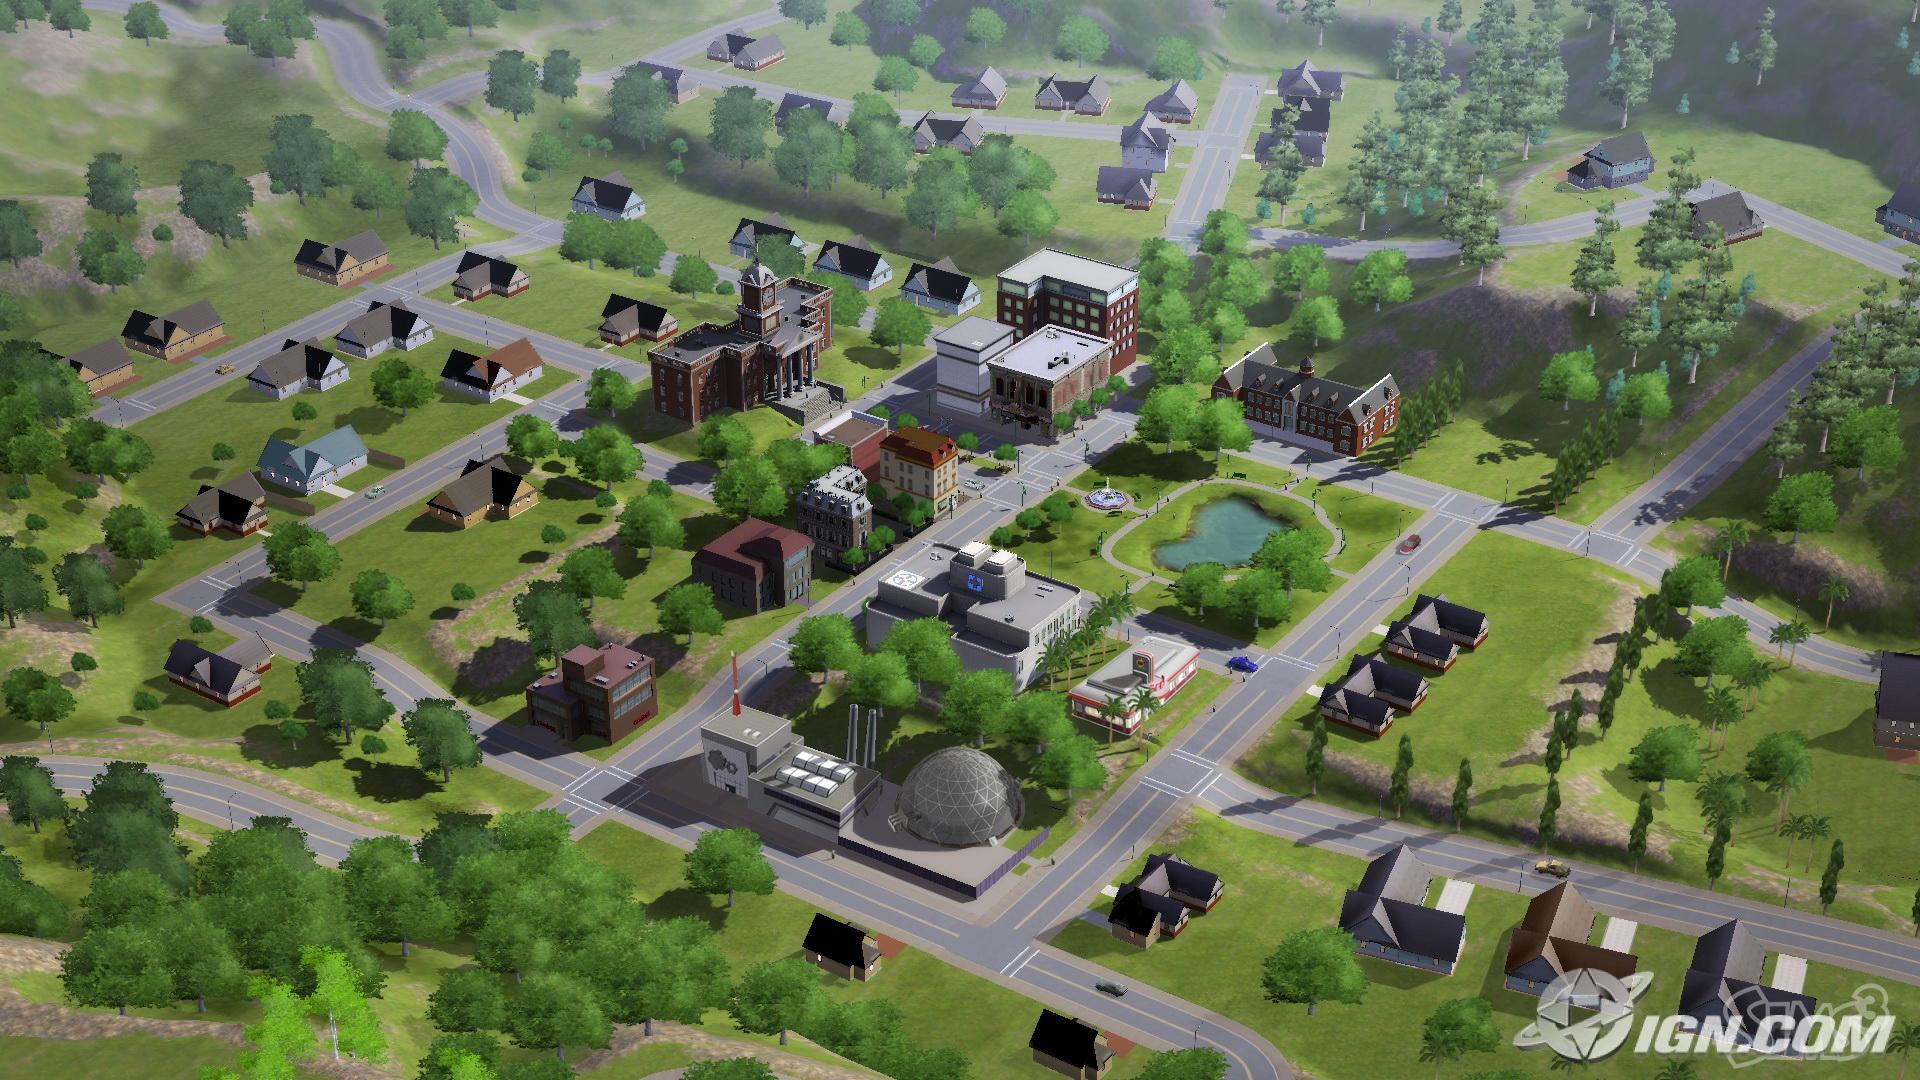 Countryside life гайд. SIMS 3 Сансет Валли. The SIMS 3. SIMS 3 Town. SIMS 3 vs SIMS 4.